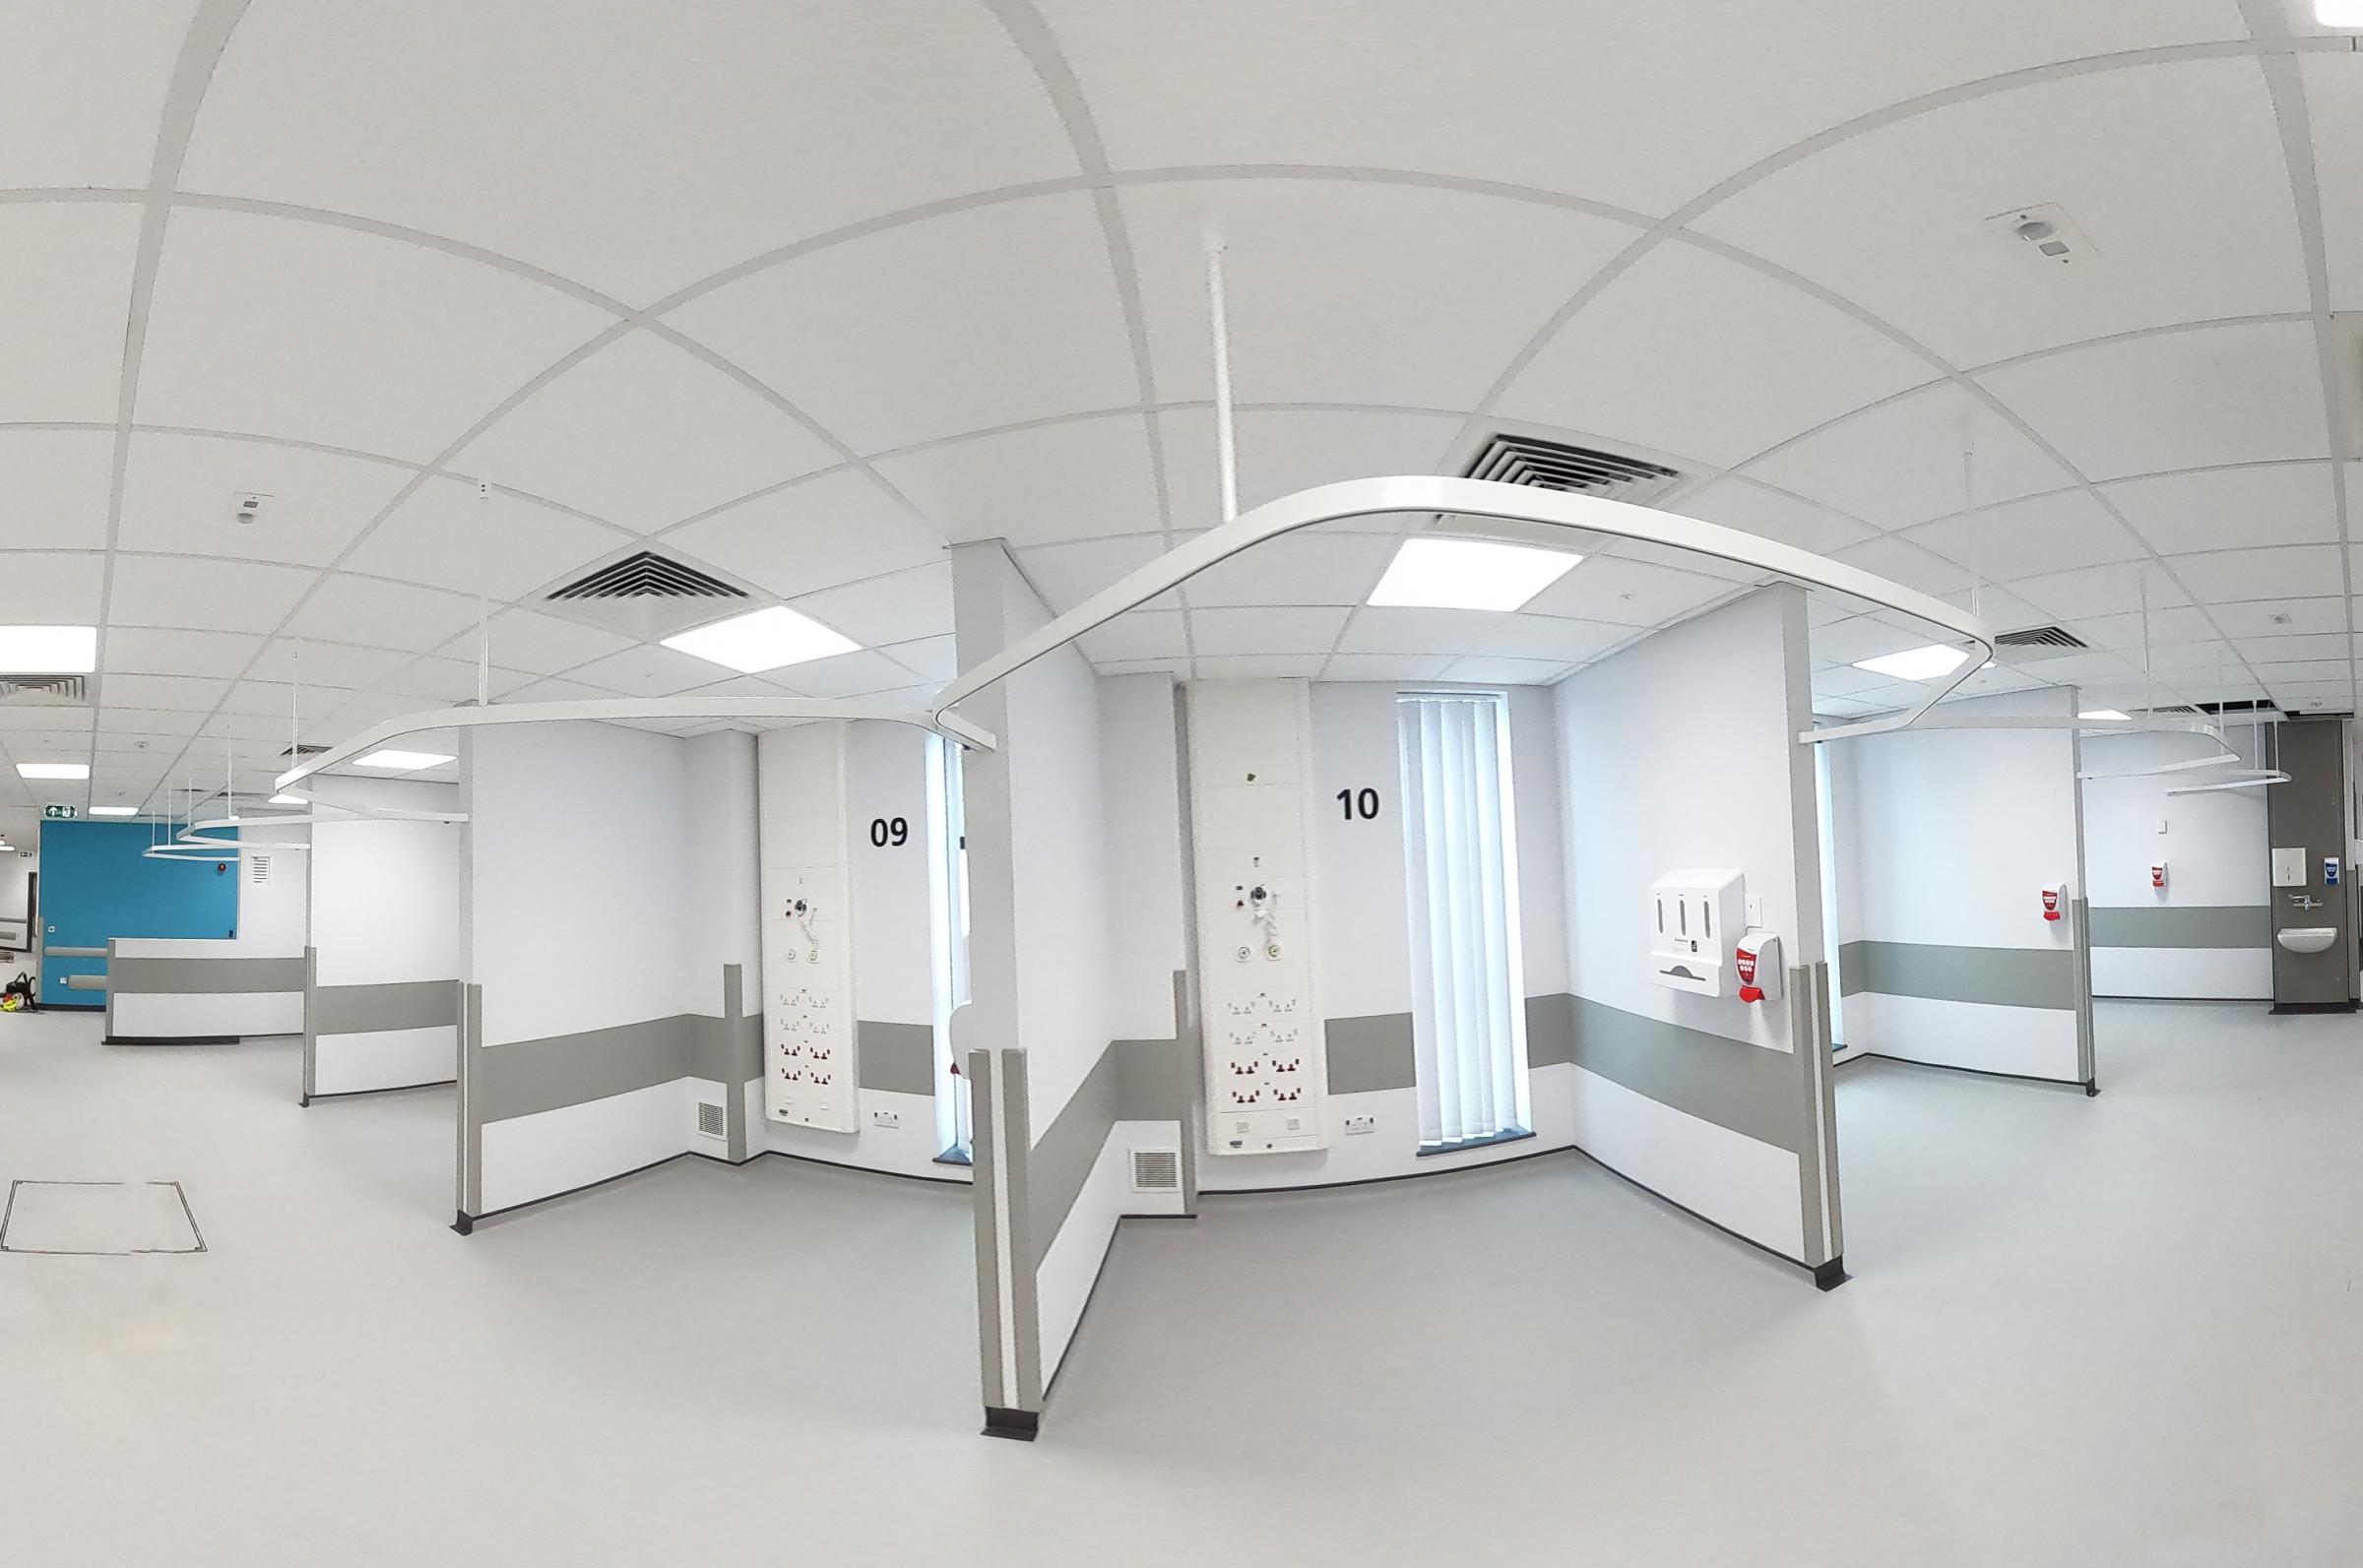 The interior of the new extension at Warrington Hospital